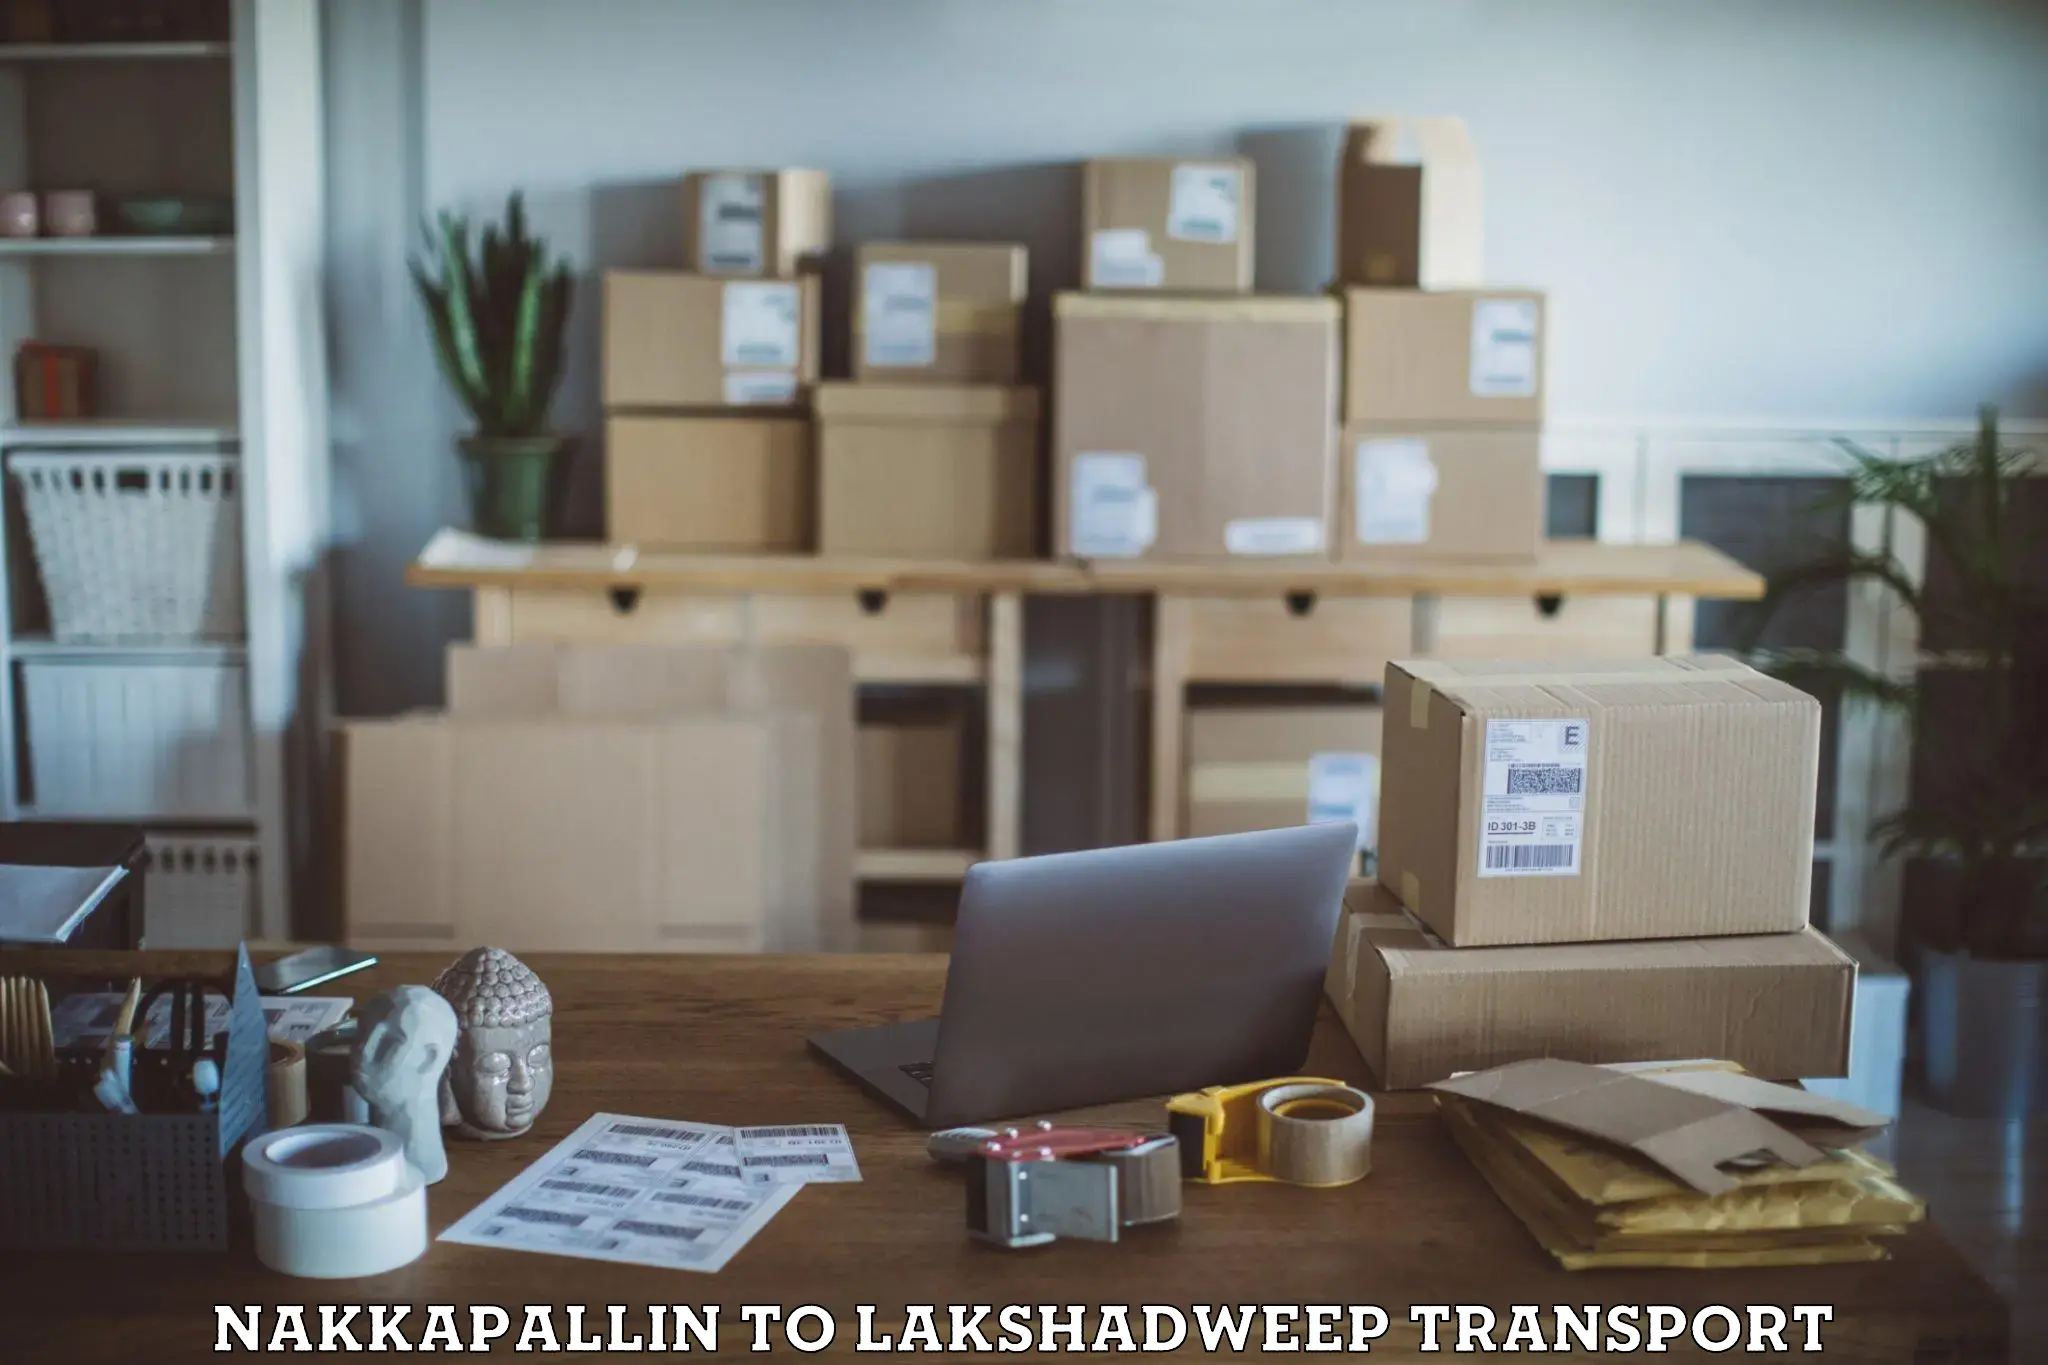 Container transport service in Nakkapallin to Lakshadweep